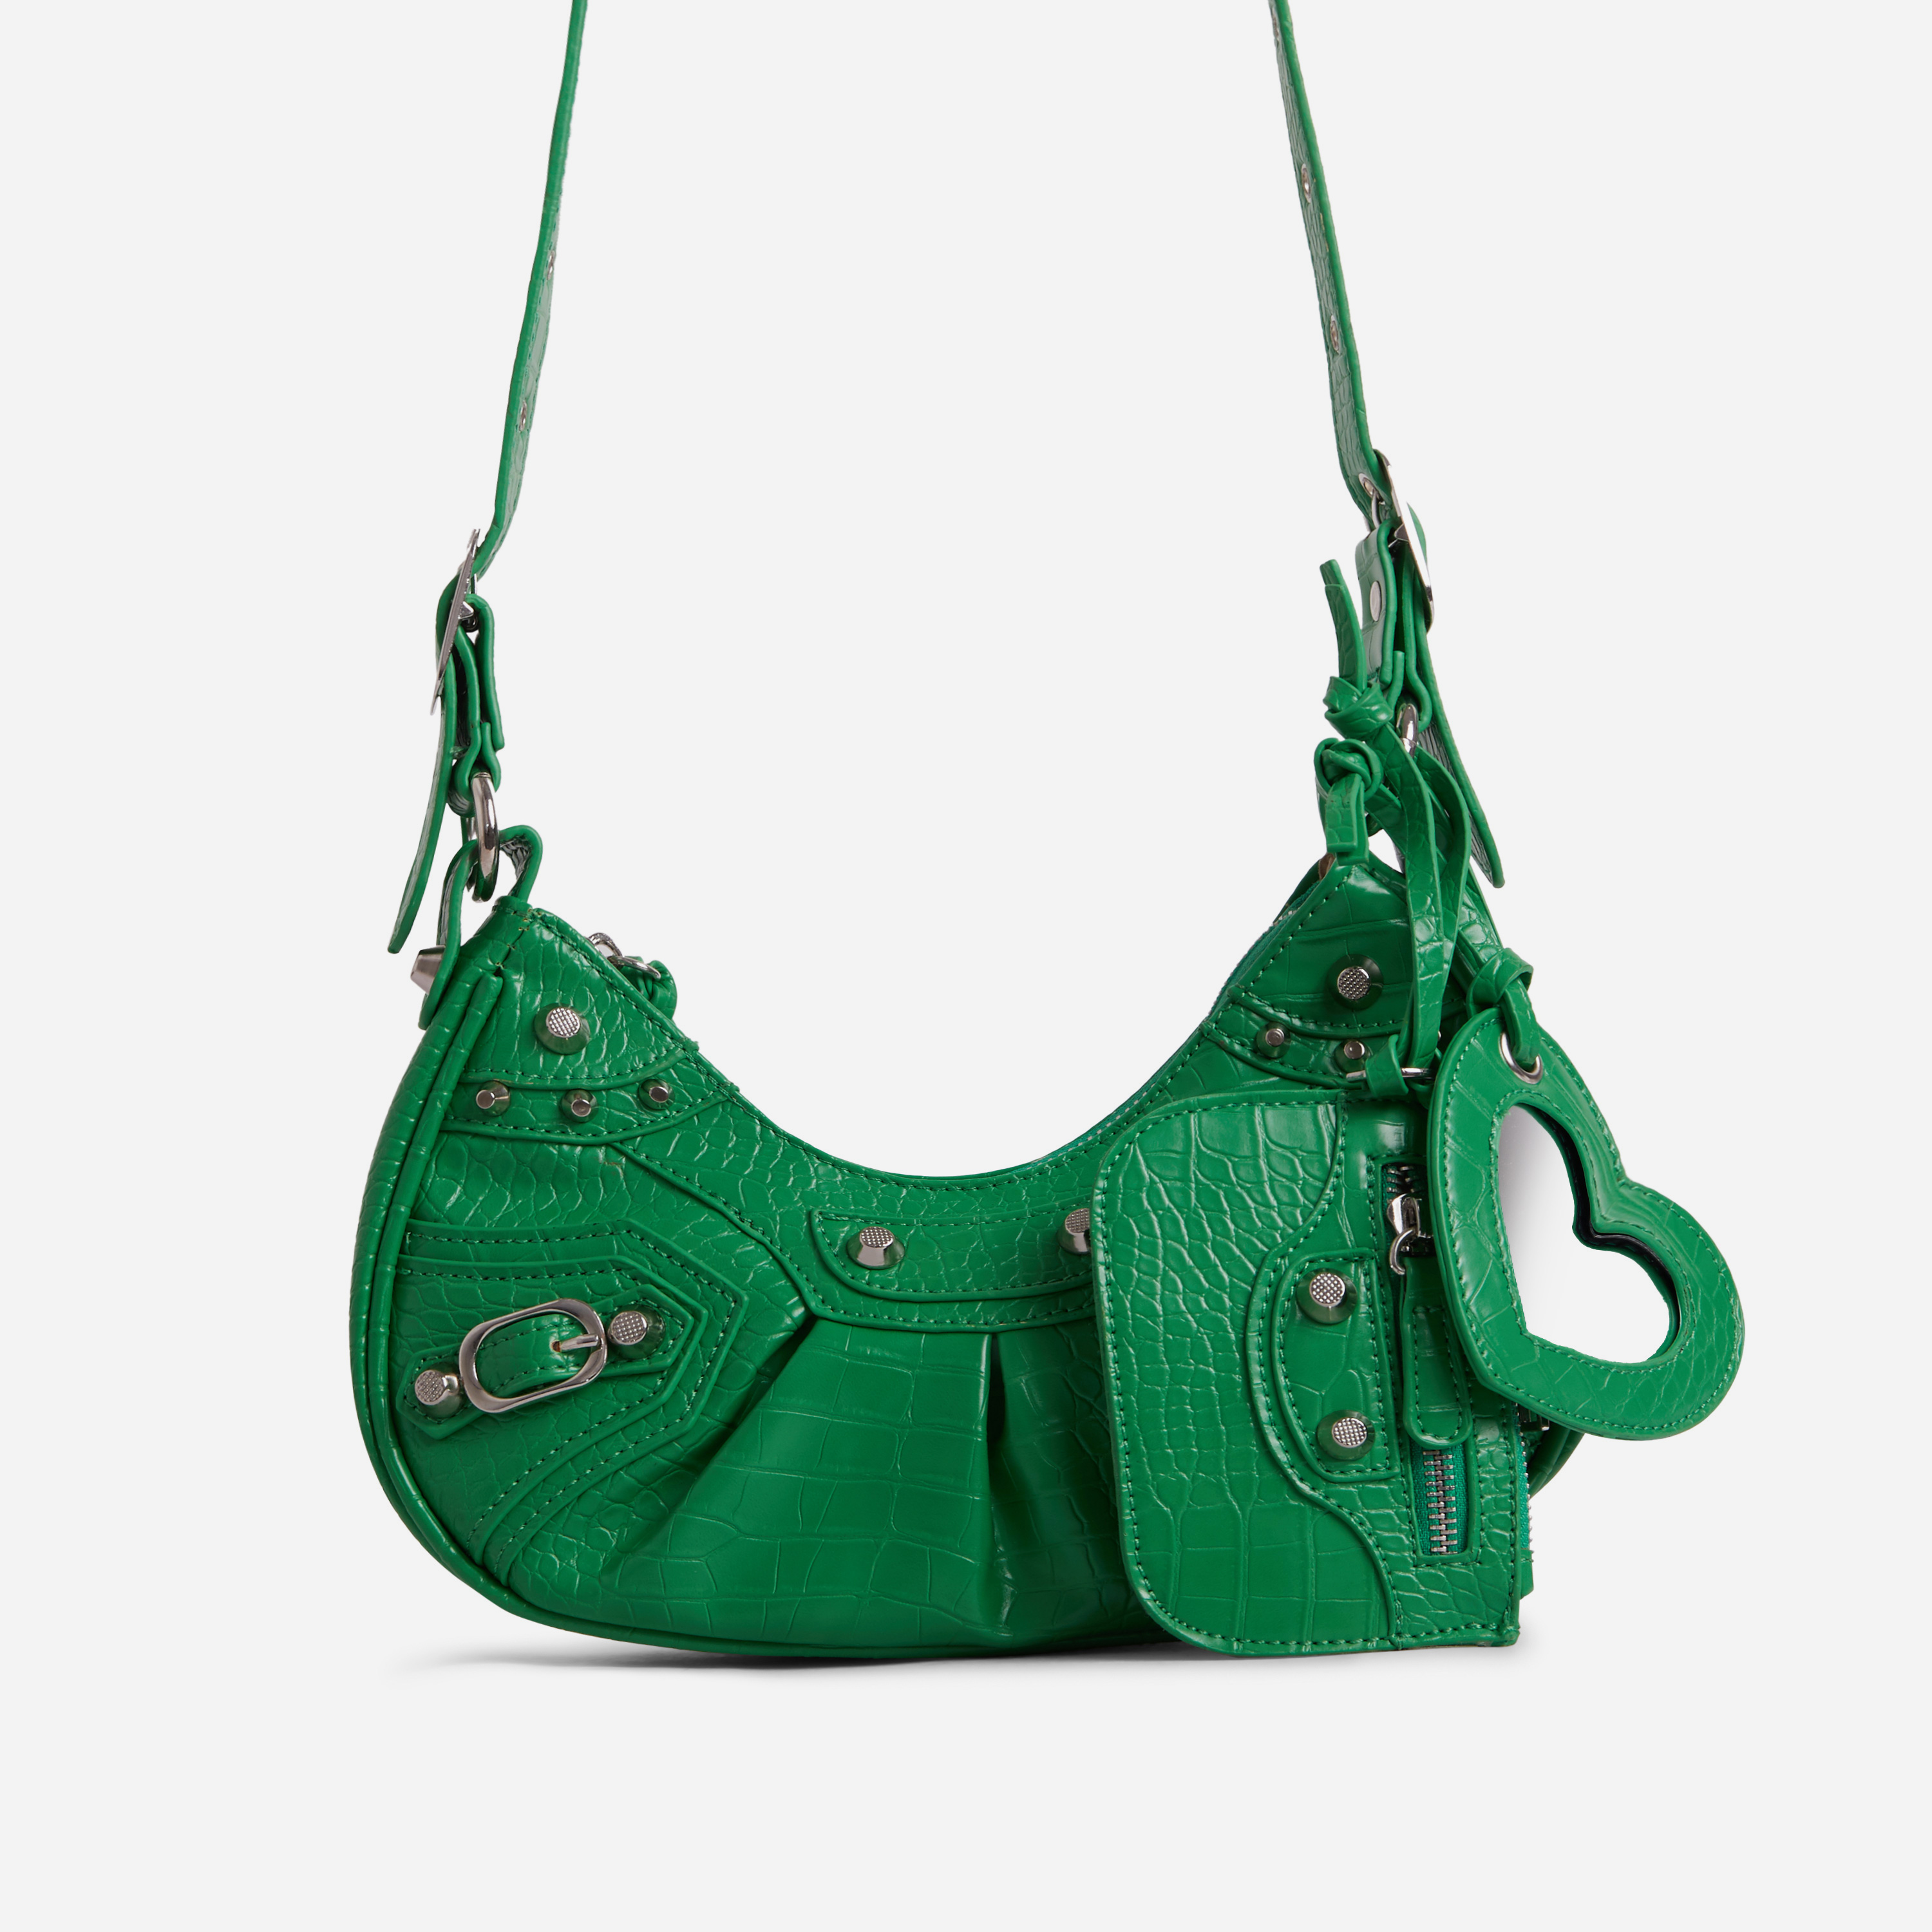 Harlin Studded Purse Detail Shoulder Bag In Green Faux Leather,, Green